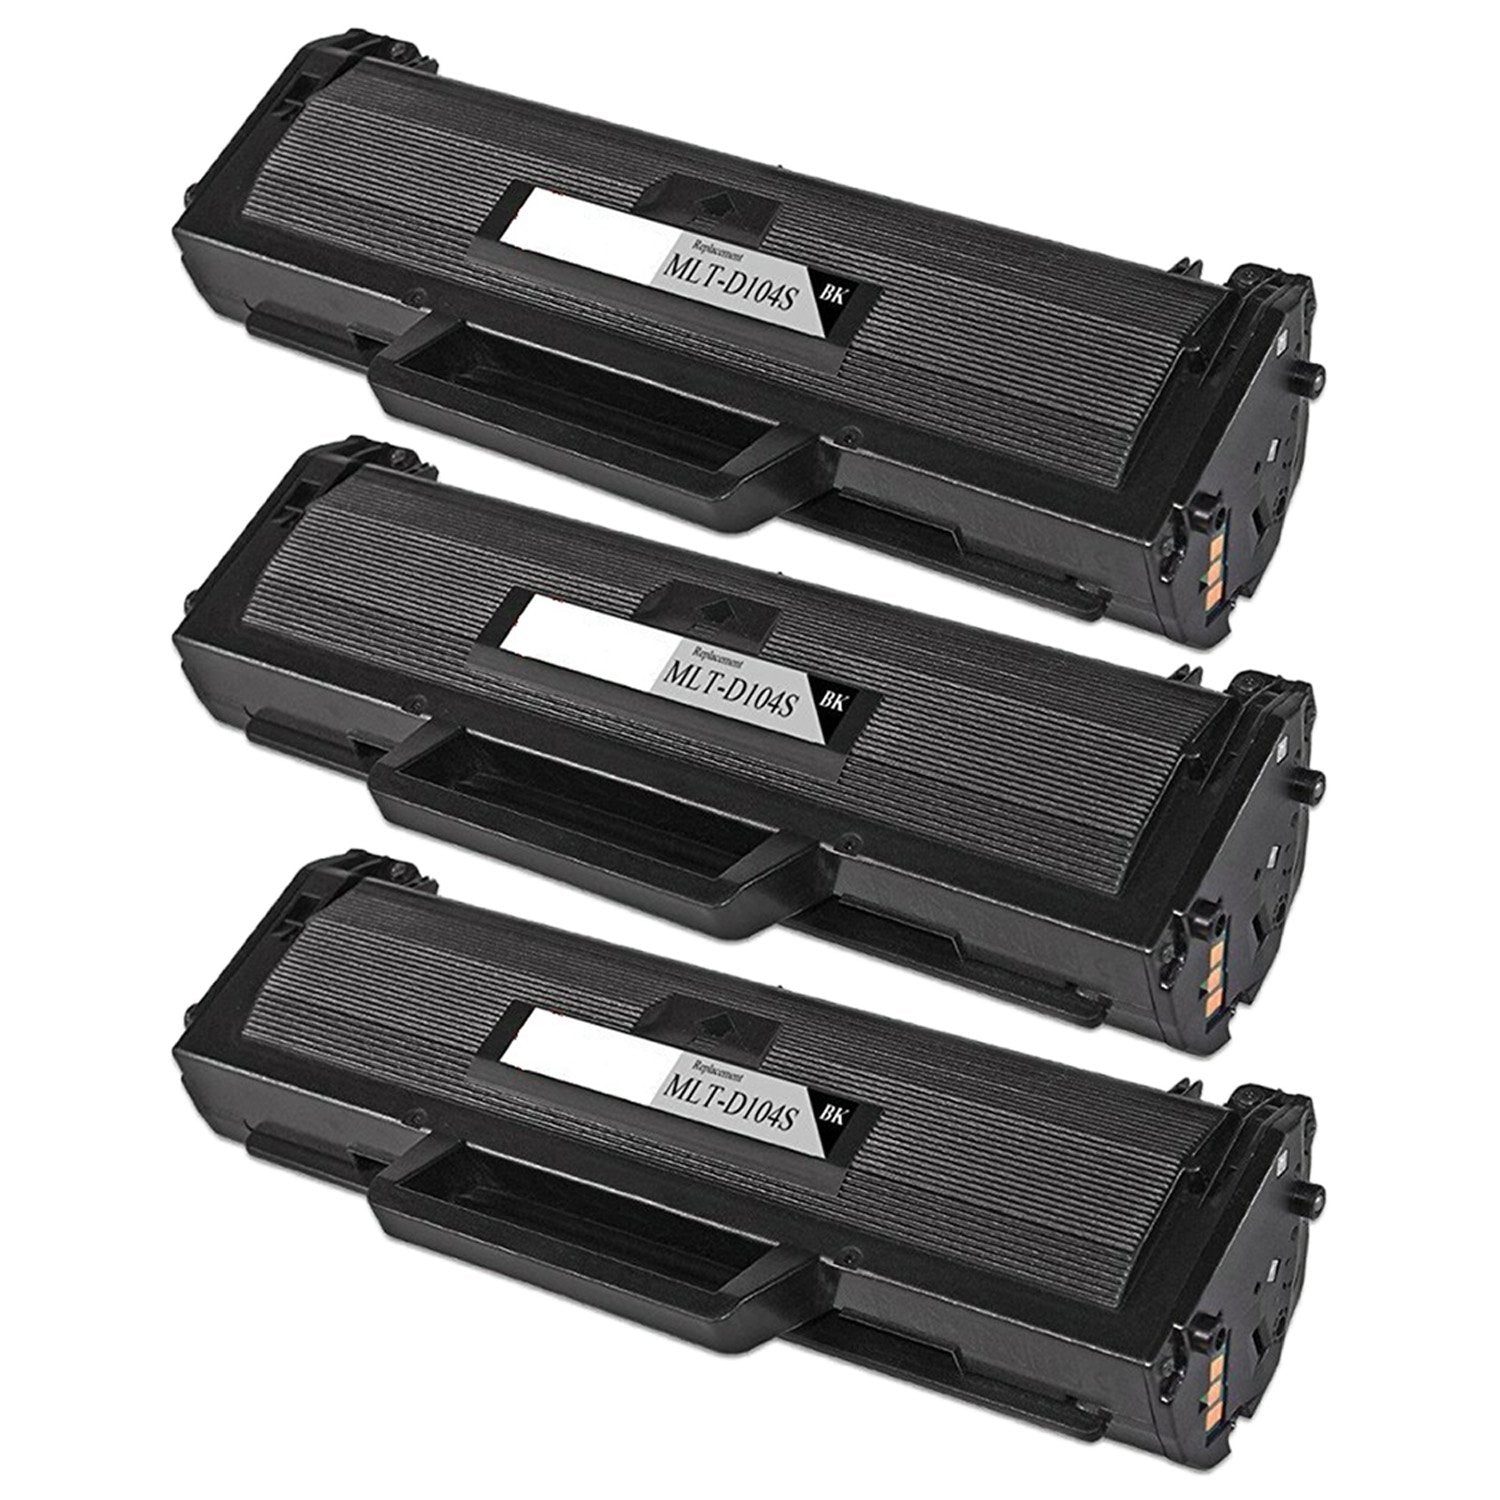 Absolute Toner Compatible Samsung MLT-D104S Black Toner Cartridge | Absolute Toner Samsung Toner Cartridges